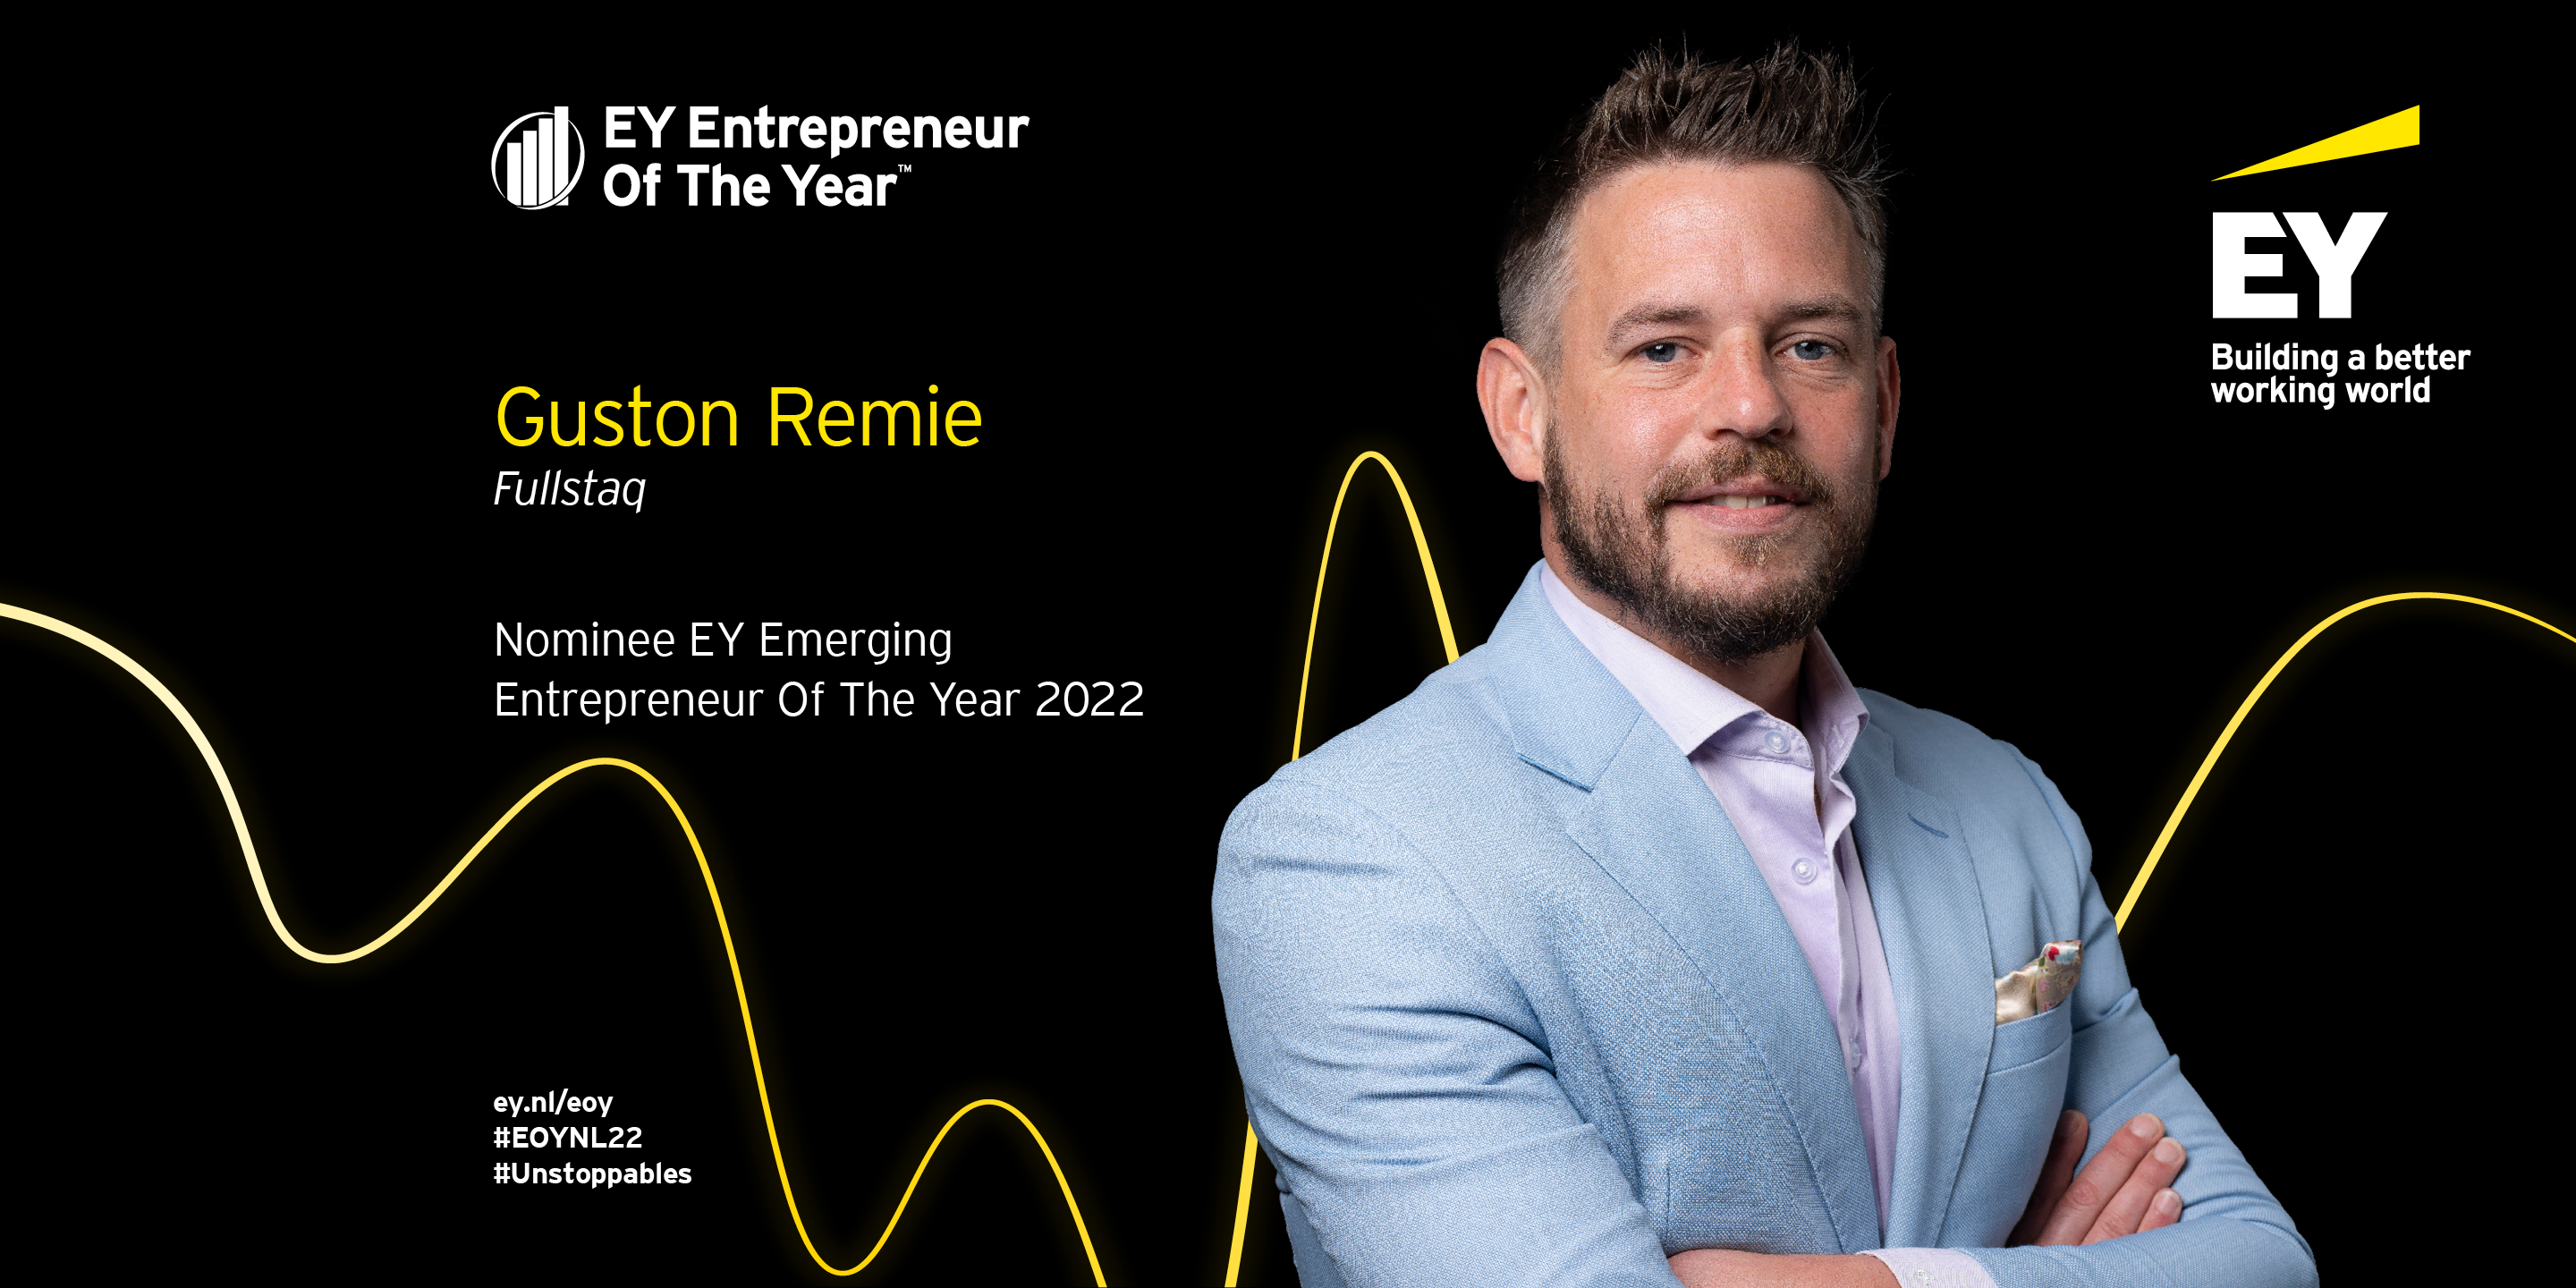 Guston Remie nominee EY Emerging Entrepreneur Of The Year 2022